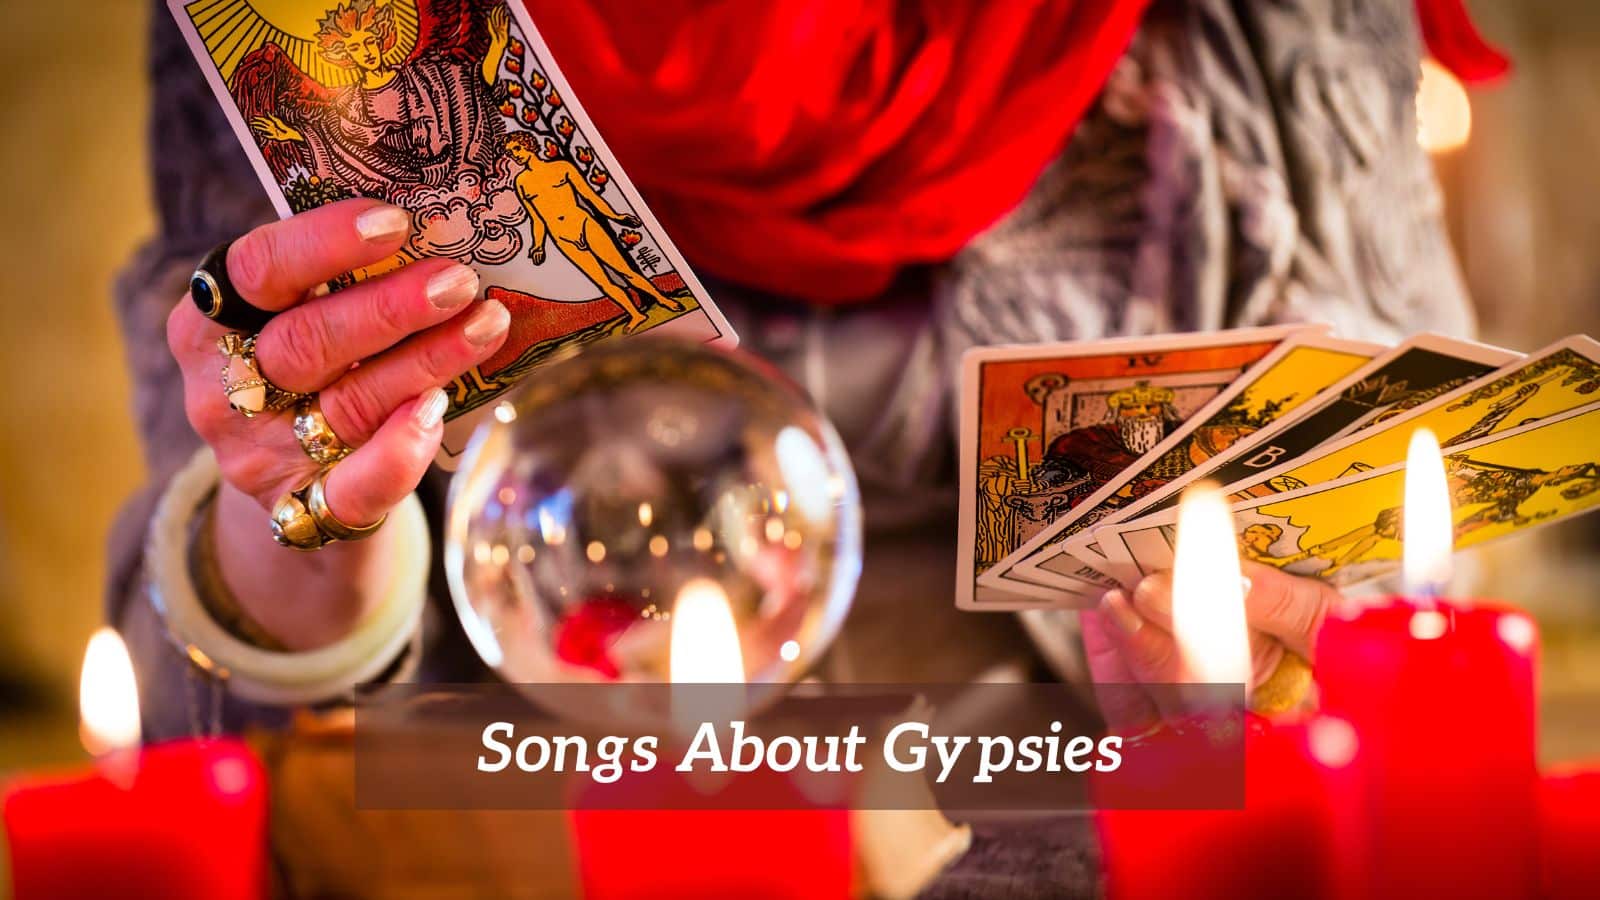 Songs About Gypsies